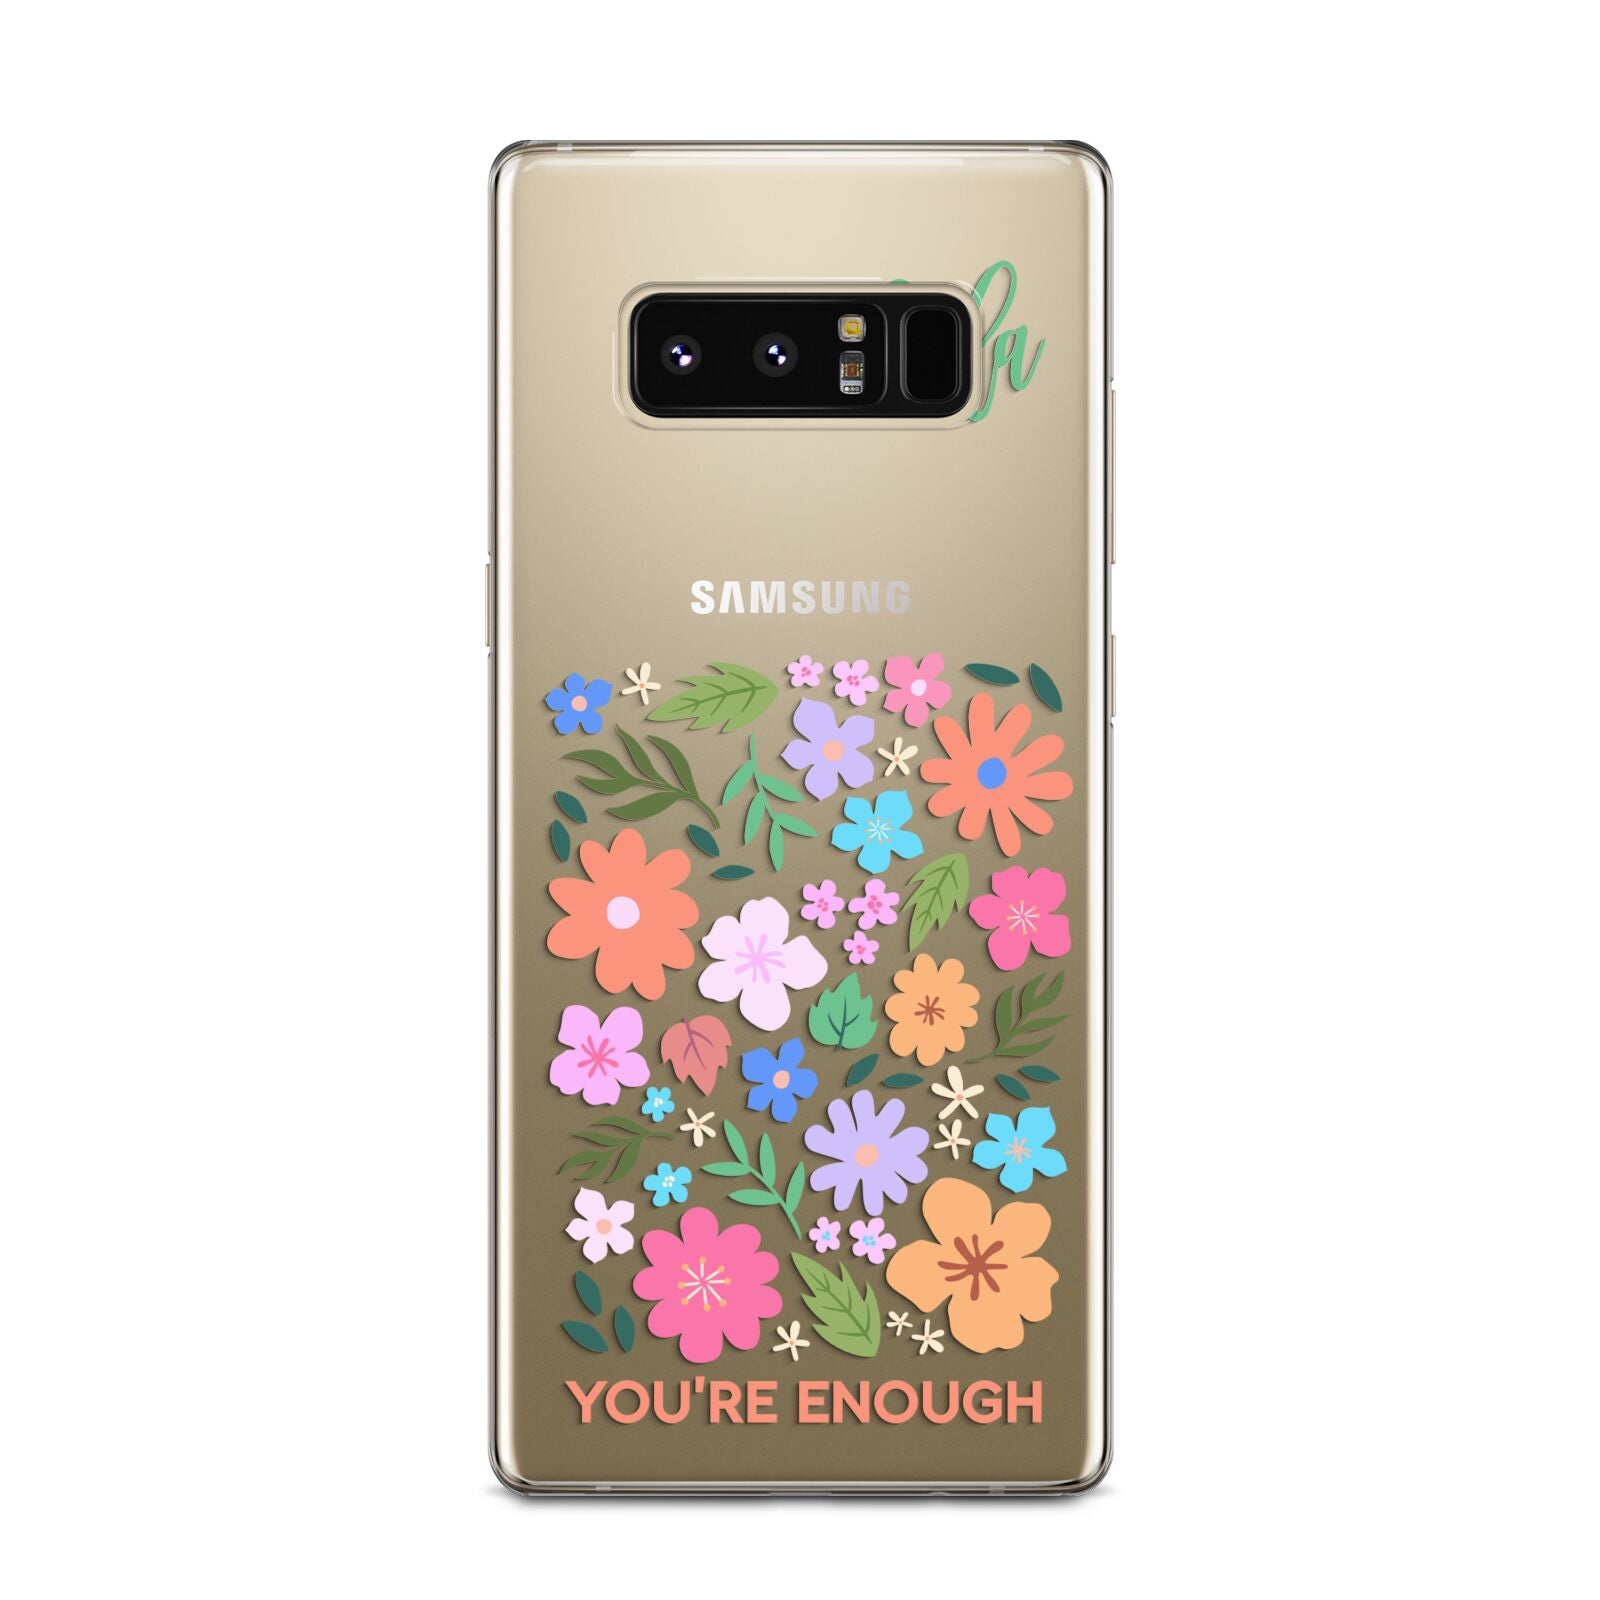 Floral Poster Samsung Galaxy Note 8 Case